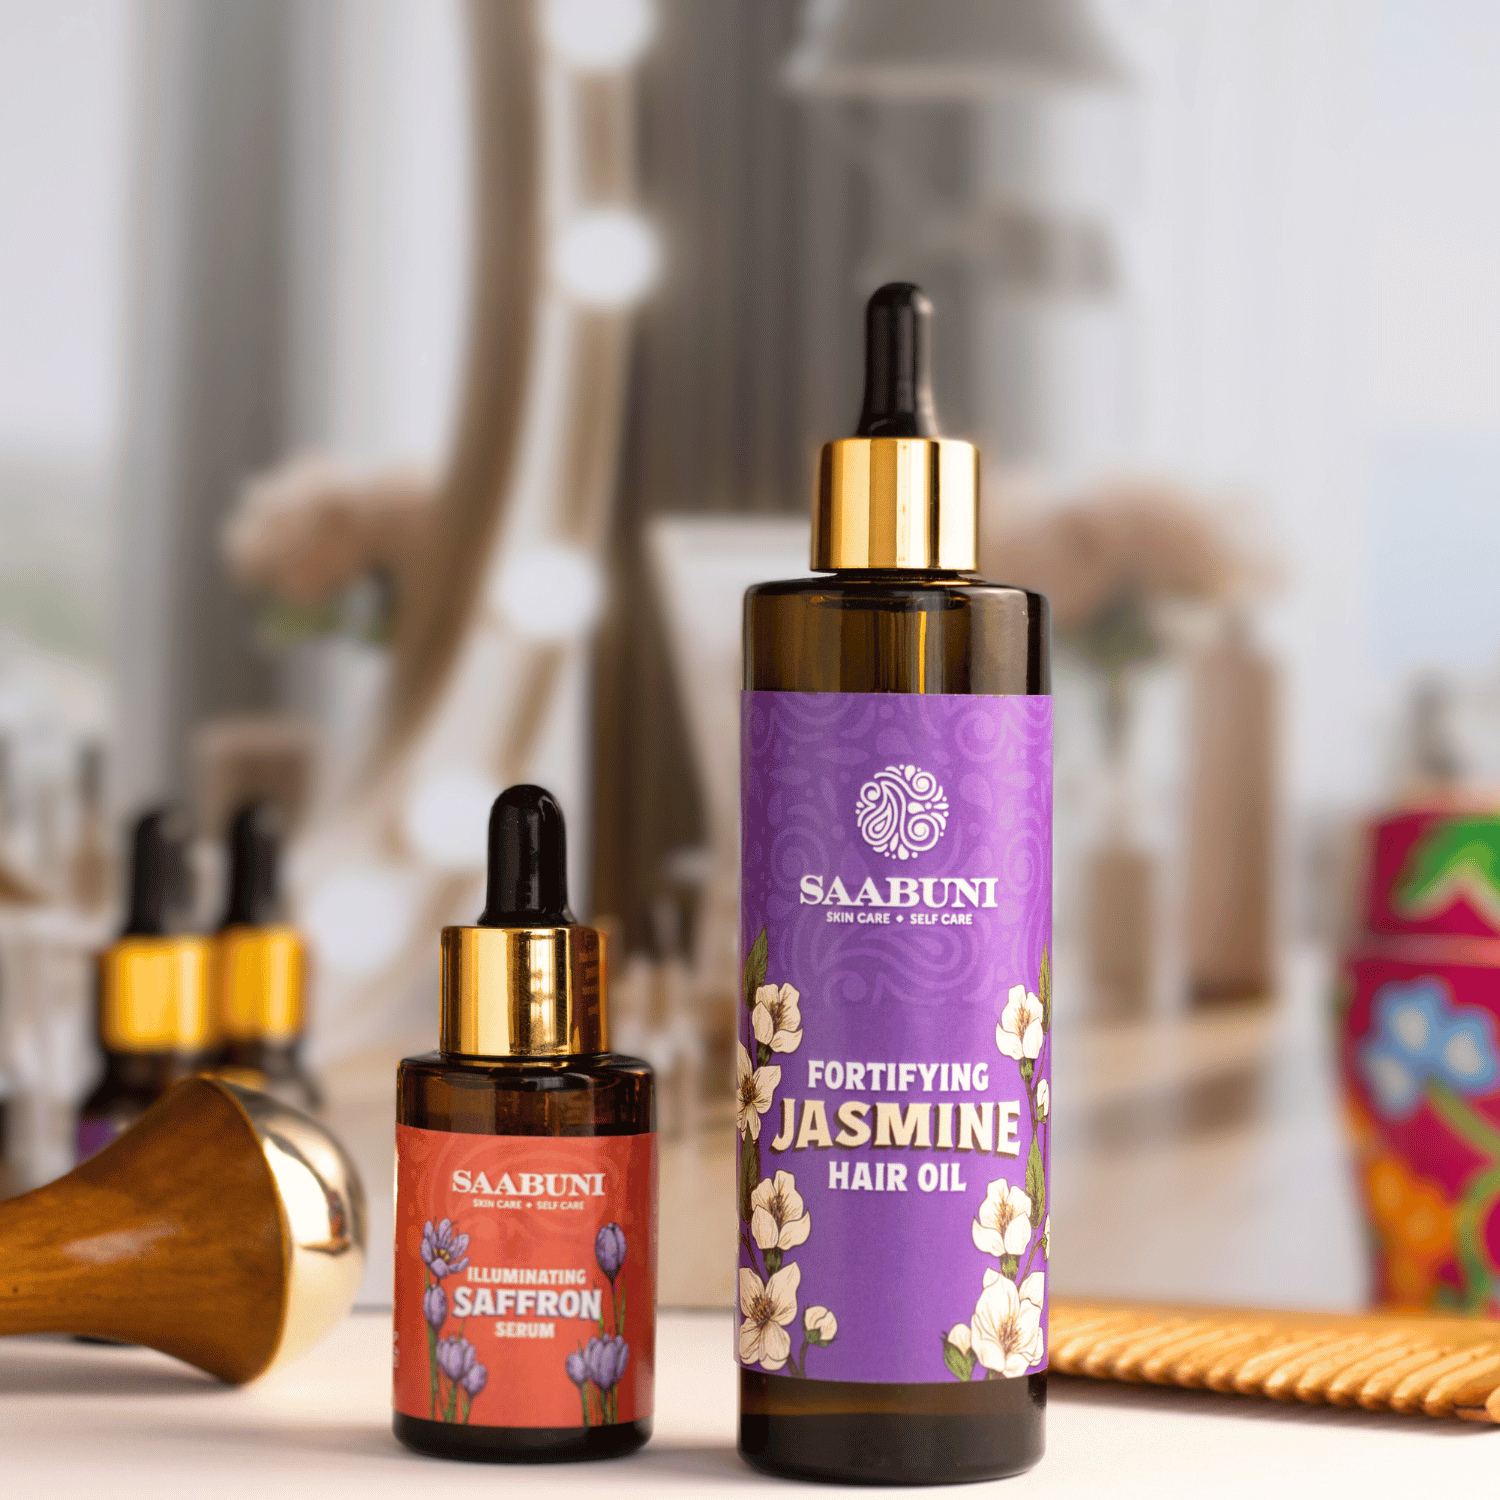 Hair Oil and Saffron serum on dressing table